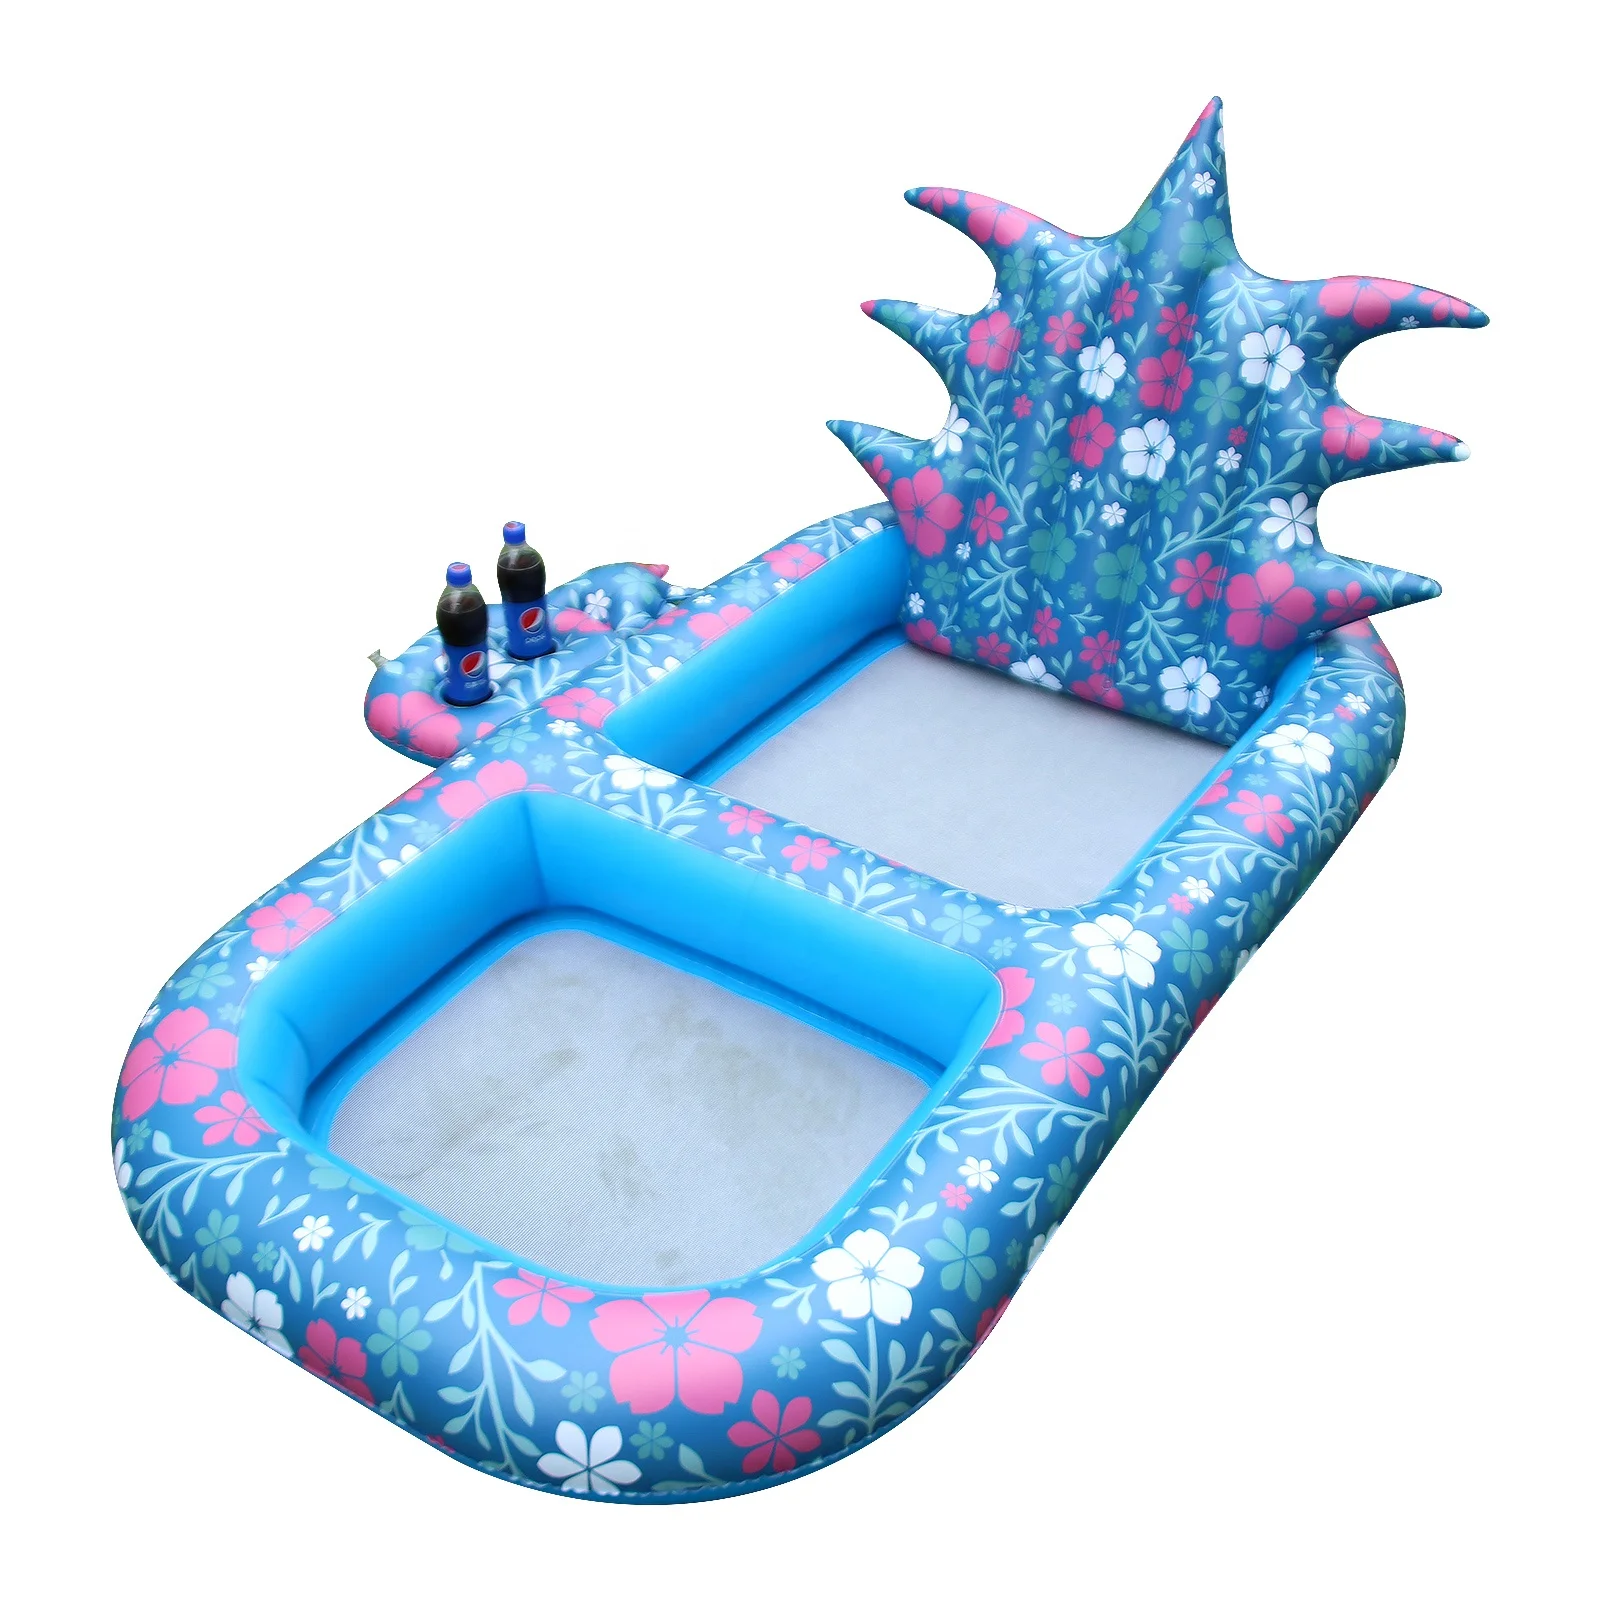 Inflatable Lounge Pool Float With Headrest Backrest Footrest & Cup Holder -  Buy Adult Floats For Lake Floating,Inflatable Rafts For Lakes,Swimming Pool  Floats Product on Alibaba.com